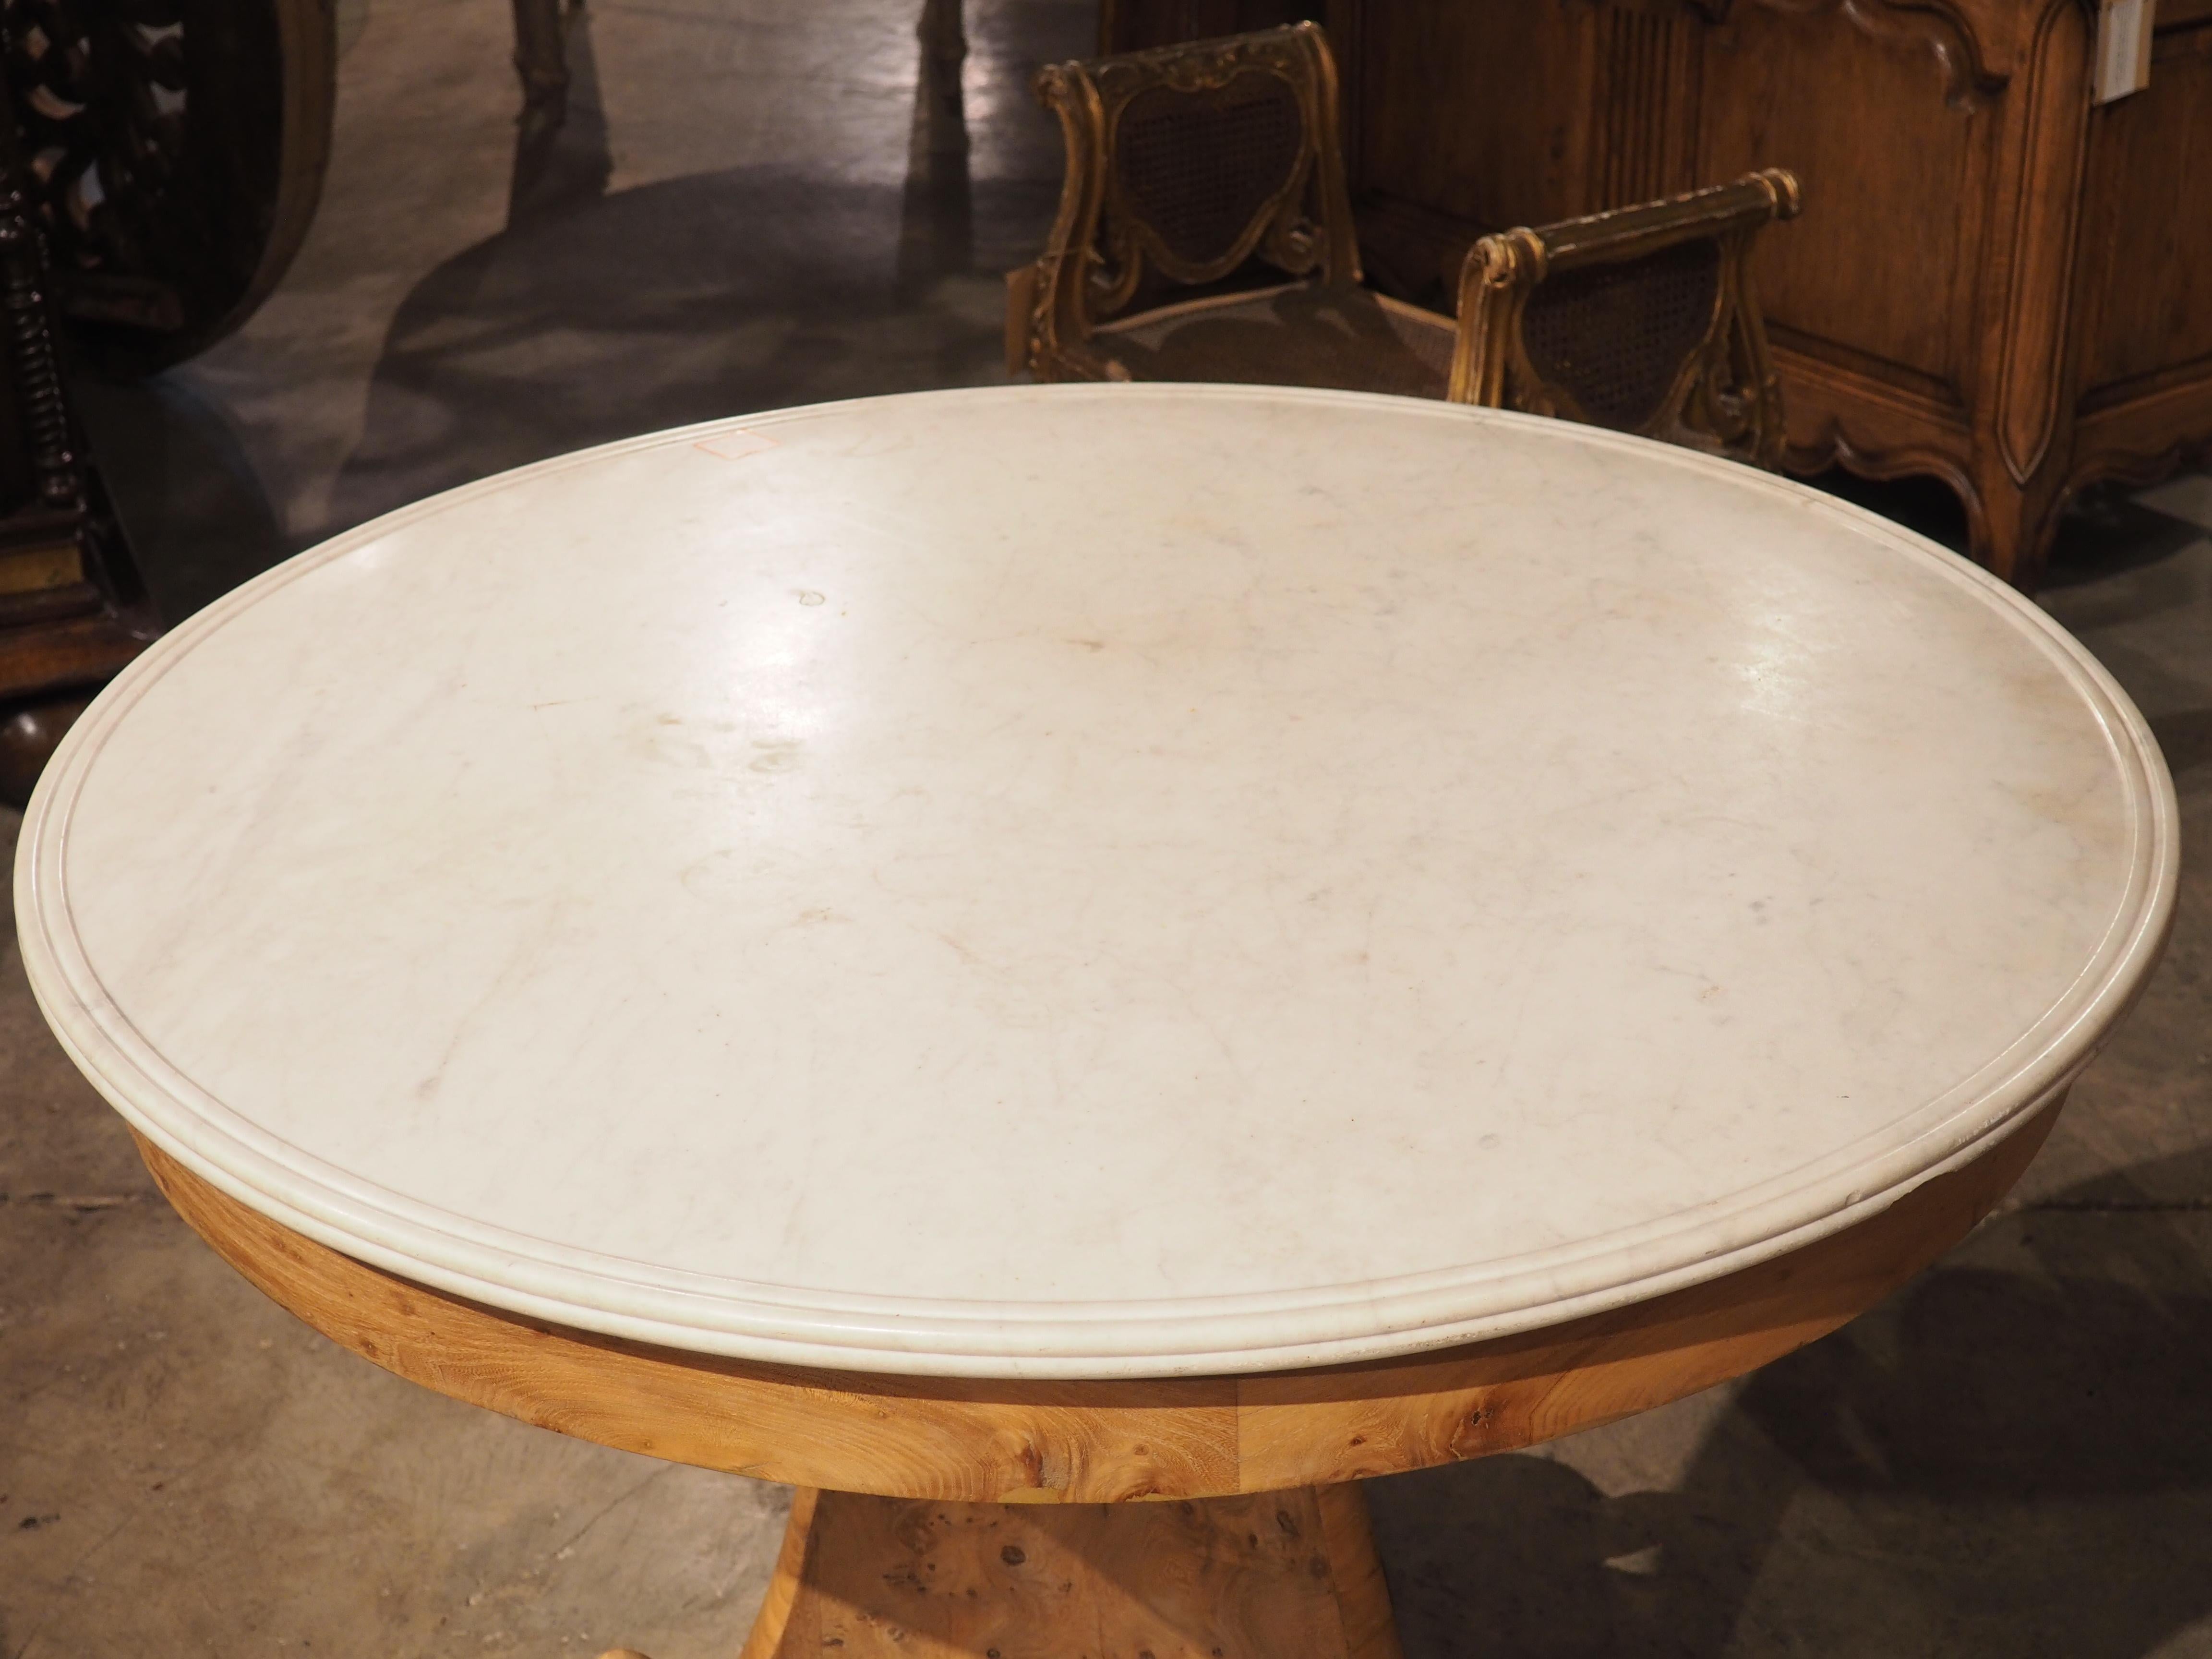 Restauration Circa 1830 French Elmwood Center Table with Marble Top